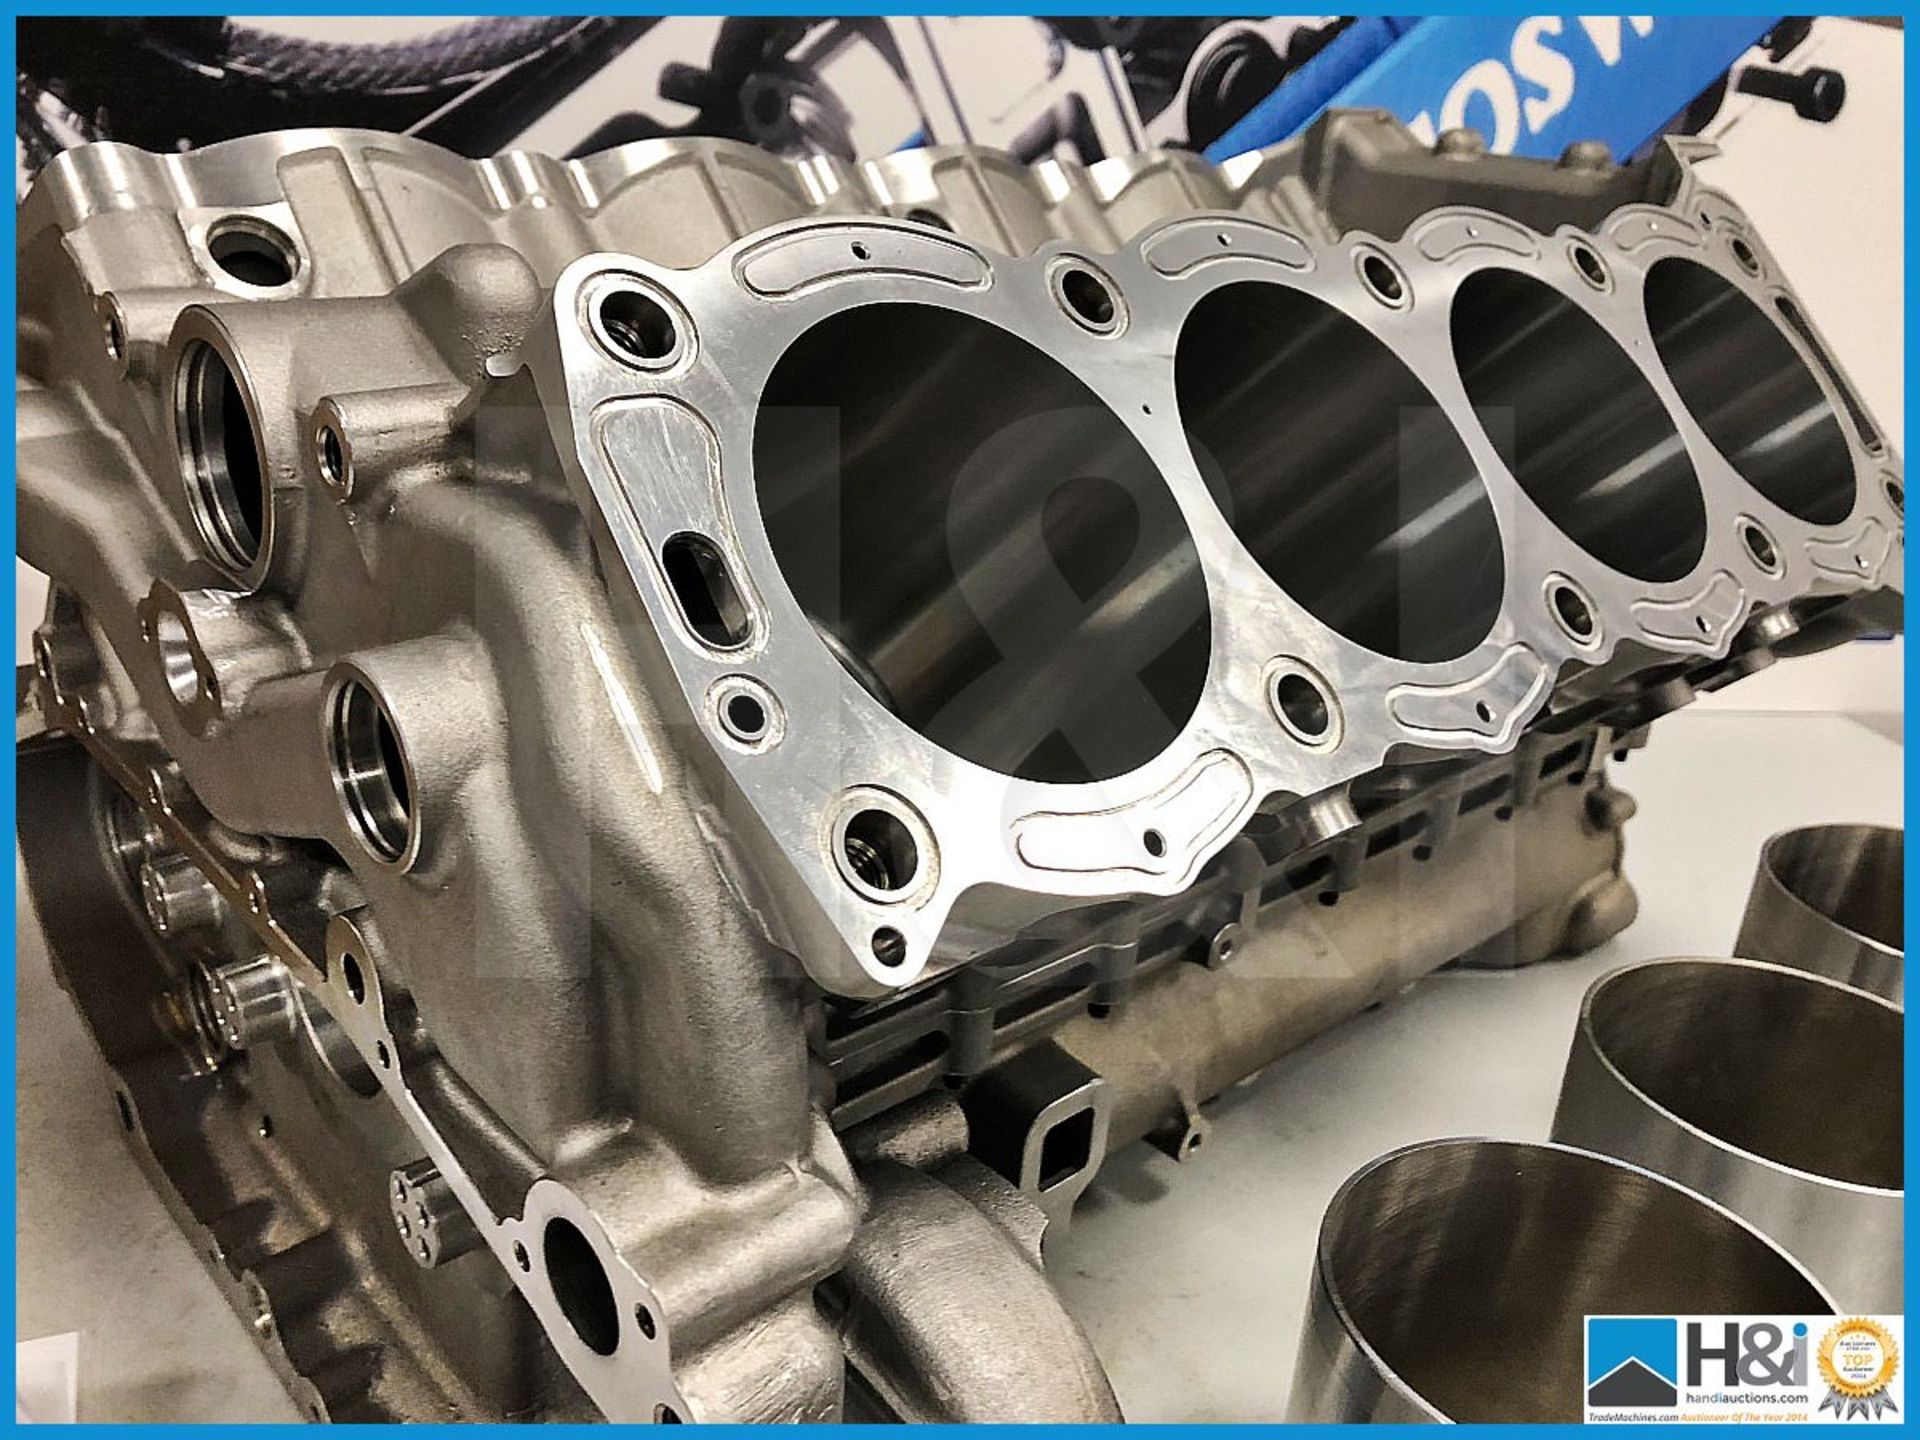 Cosworth XG indycar V8 block, sump and liner assembly. Code: 20001070. Lot 3. RRP GBP 9,500 - Image 2 of 6